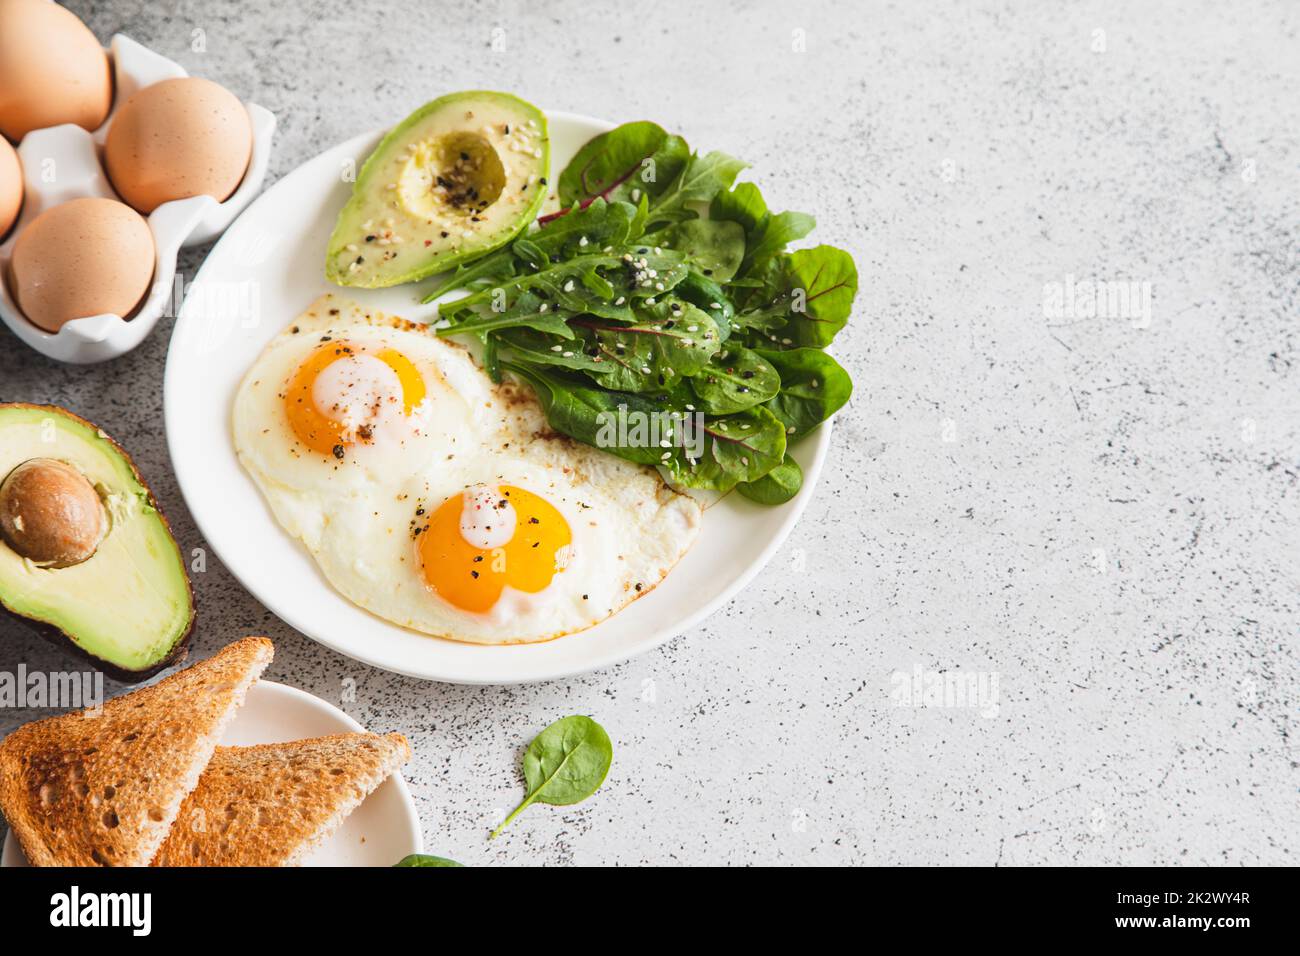 Healthy Breakfast with Wholemeal Bread Toast, Eggs with Green Salad, Avocado. traditional breakfast Stock Photo